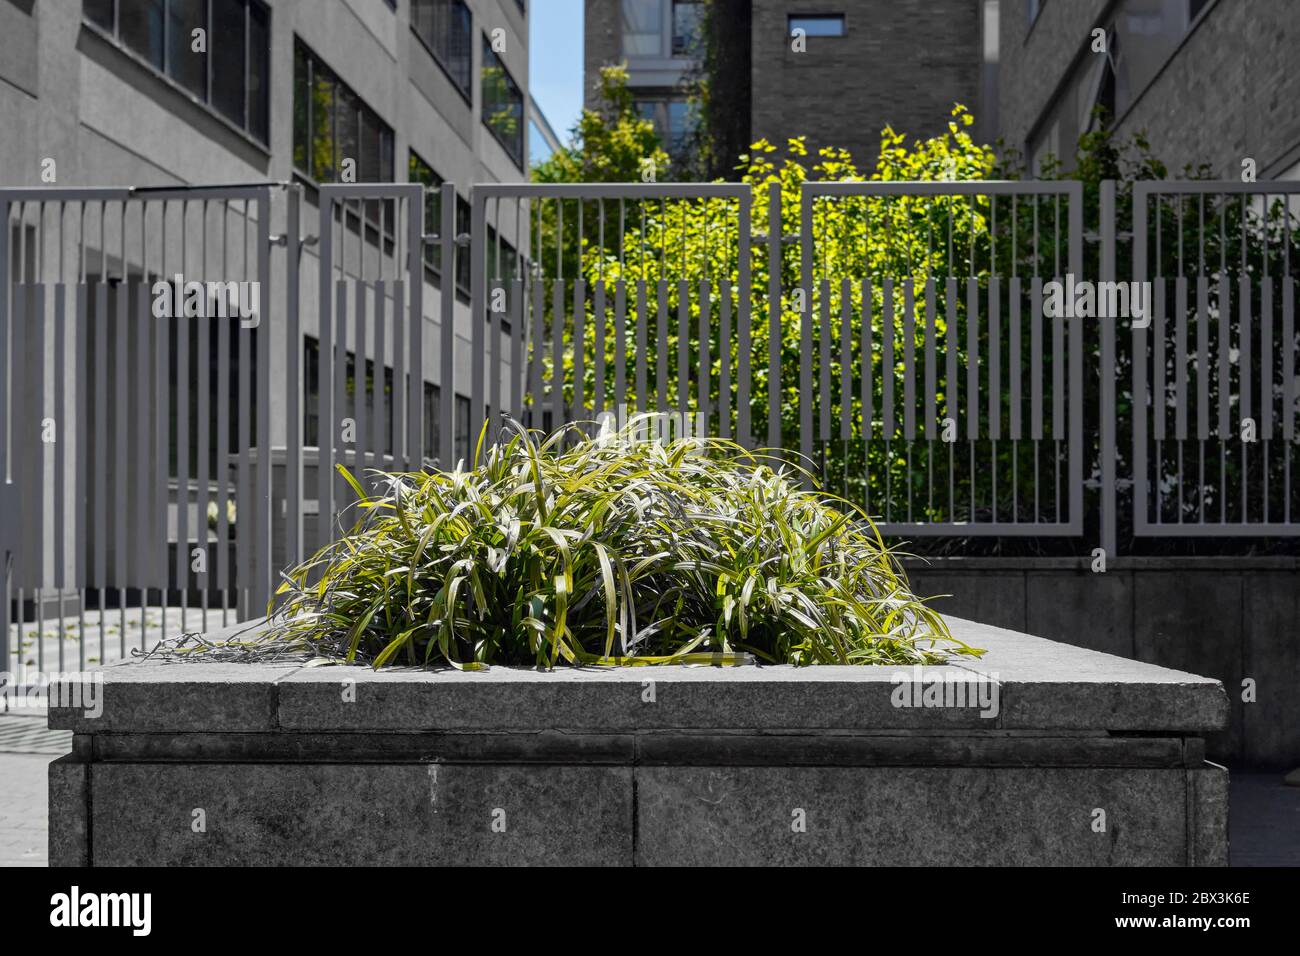 Selective color image of plants and tree on urban street in front of fence Stock Photo